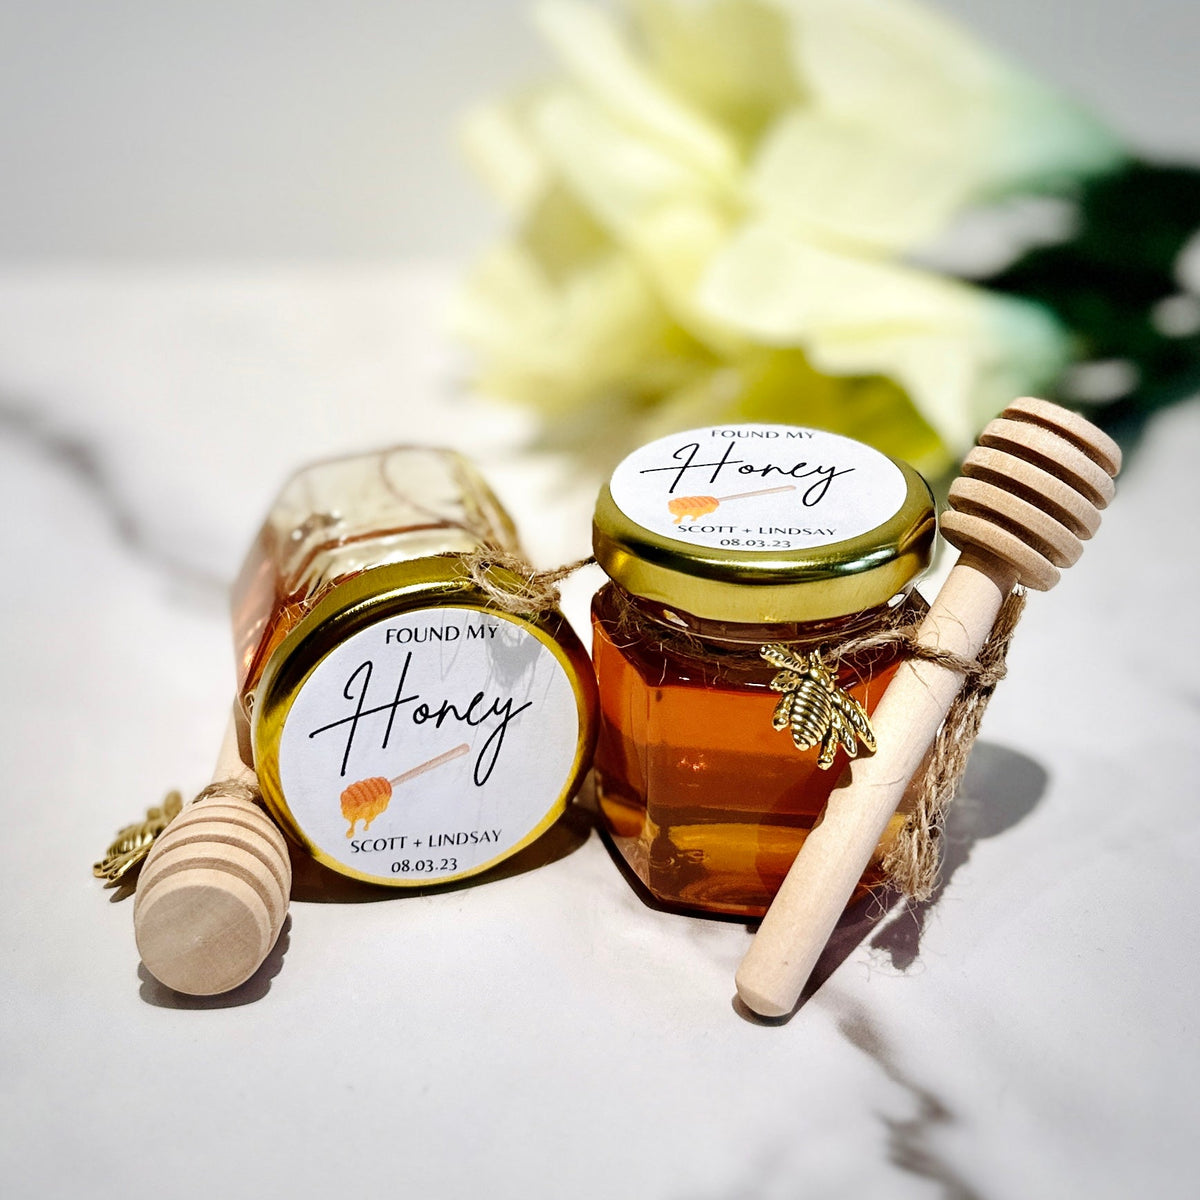 Found My Honey Label - Forever Wedding Favors